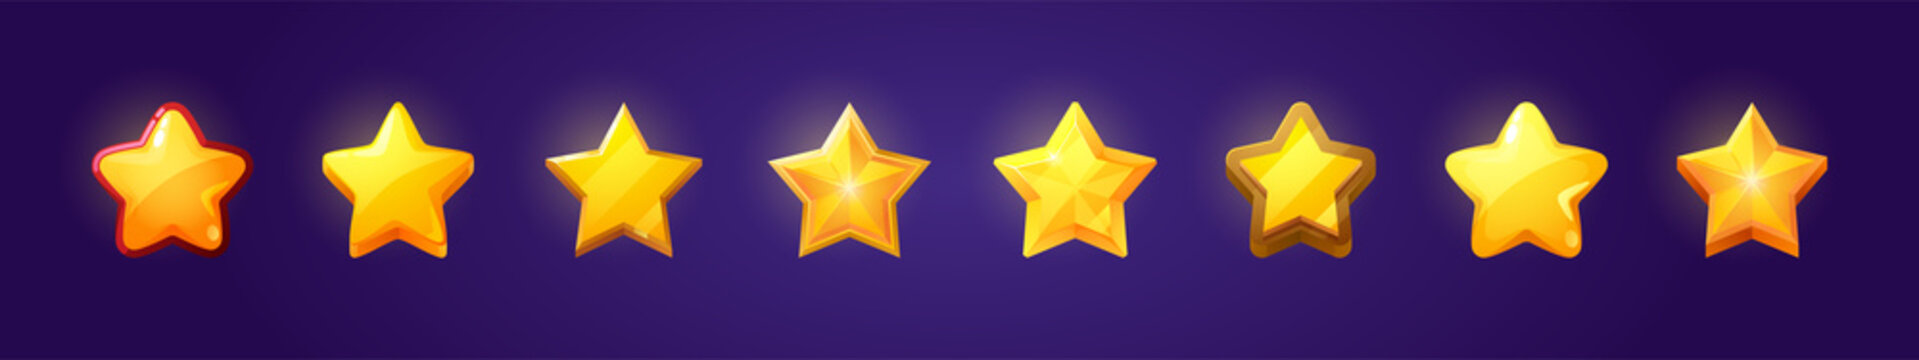 Set of game ui stars, rate or gui design elements yellow golden glossy assets for app user interface and score display, winner achievement isolated symbols, bonus Cartoon vector illustration, icons